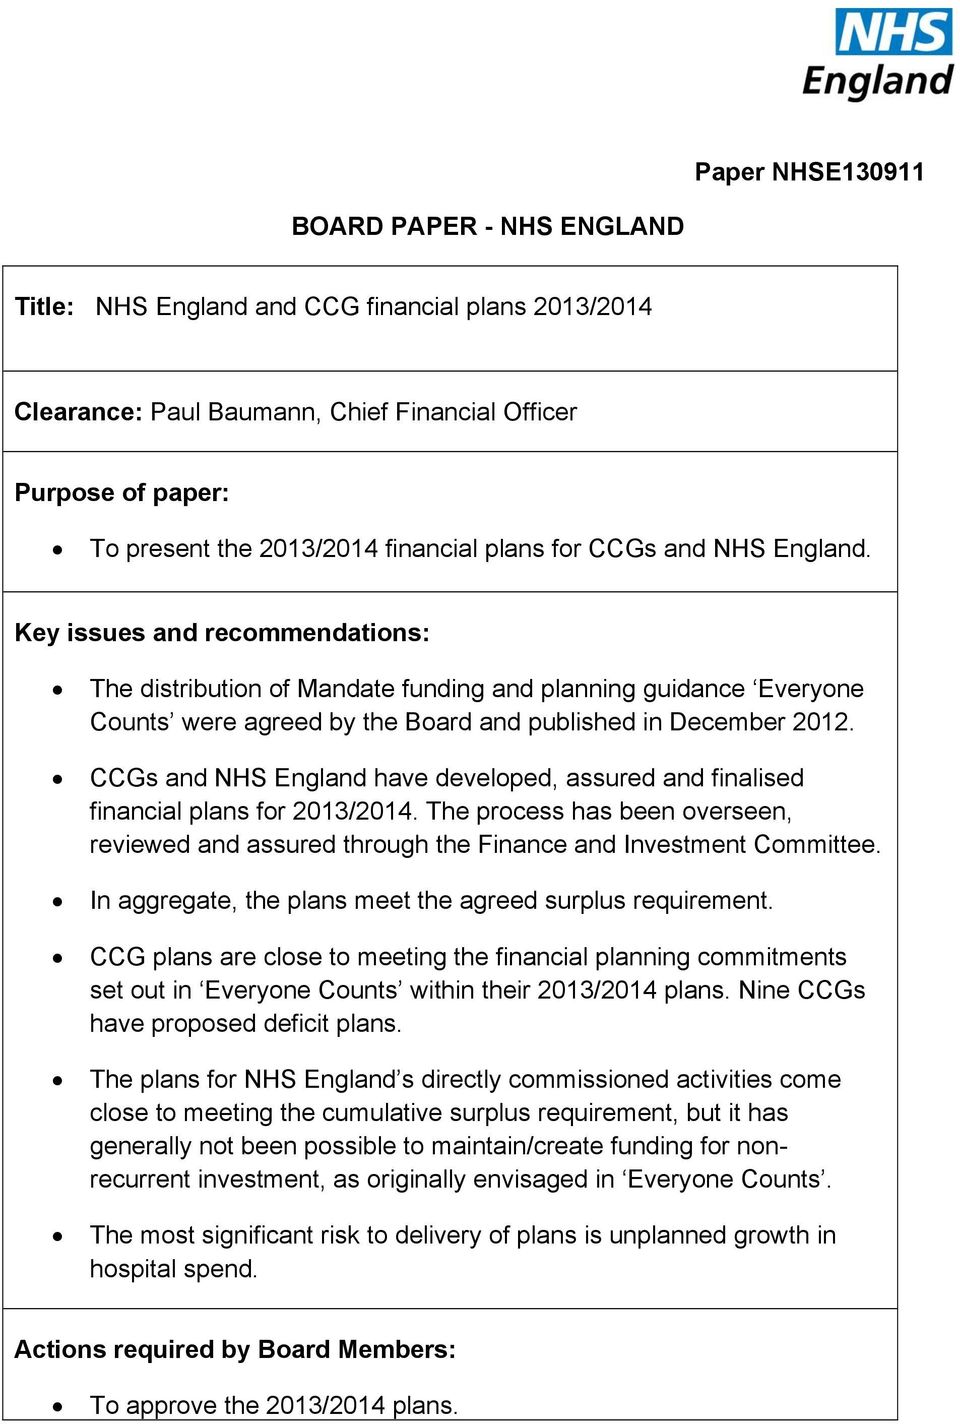 CCGs and NHS England have developed, assured and finalised financial plans for 2013/2014. The process has been overseen, reviewed and assured through the Finance and Investment Committee.